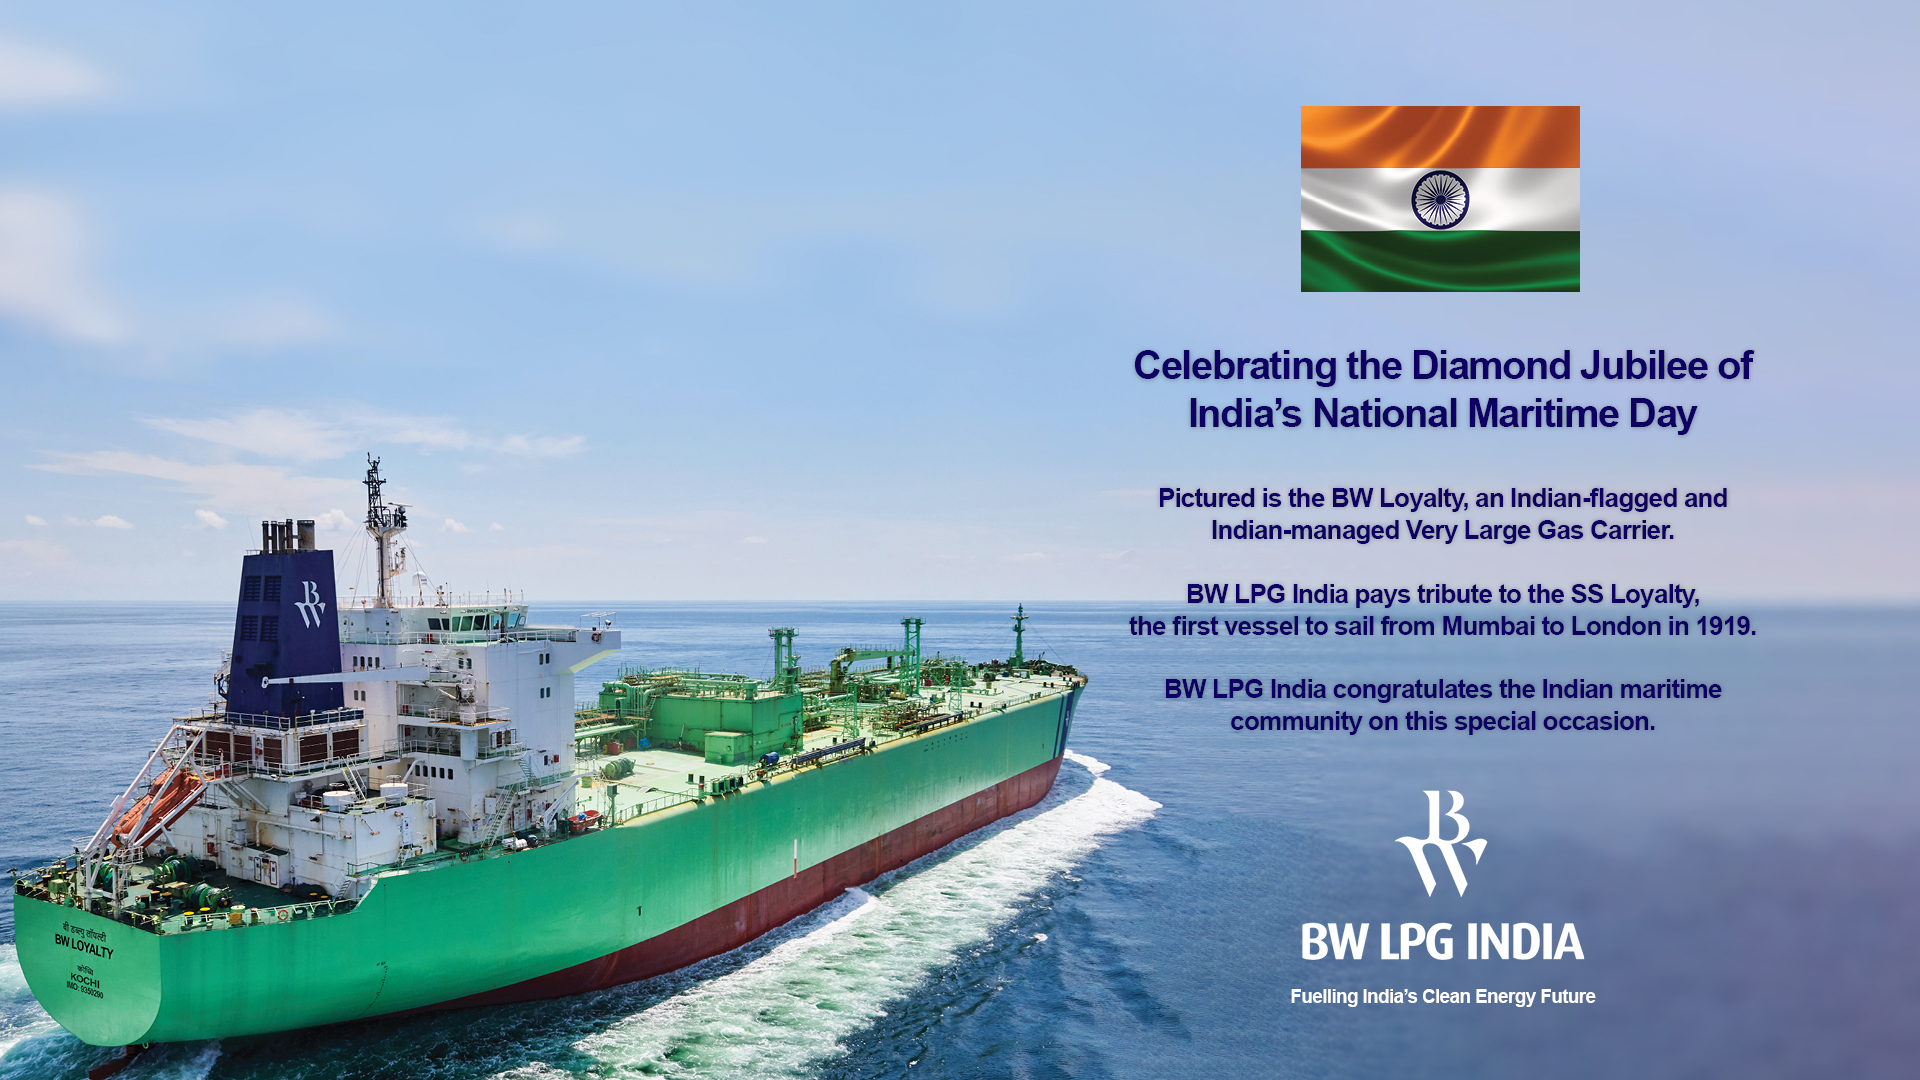 We proudly celebrate the Diamond Jubilee of India’s National Maritime Day